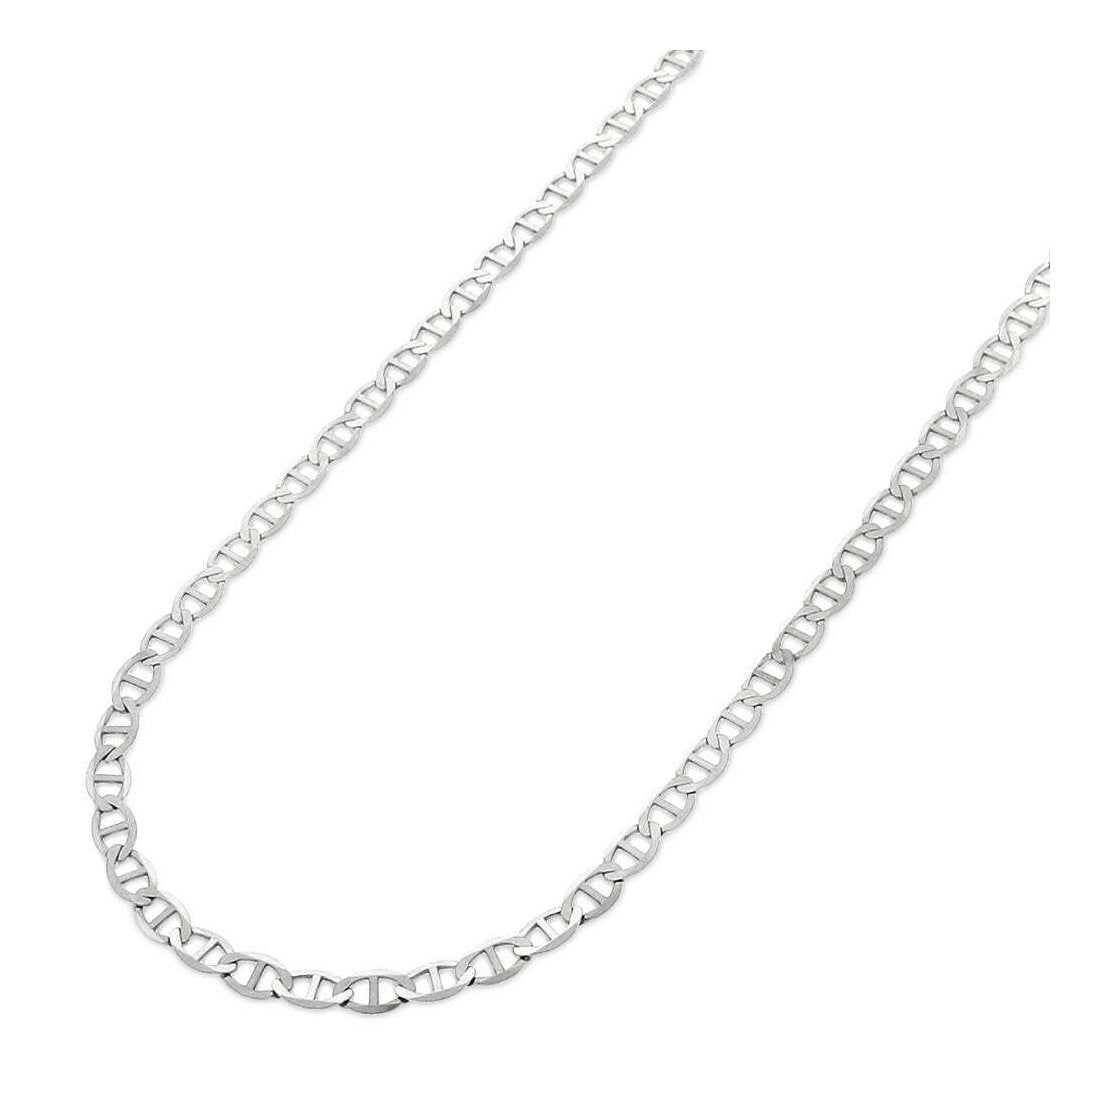 6.3MM 150 Mariner Chain .925 Solid Sterling Silver Available In 7"-36" Inches